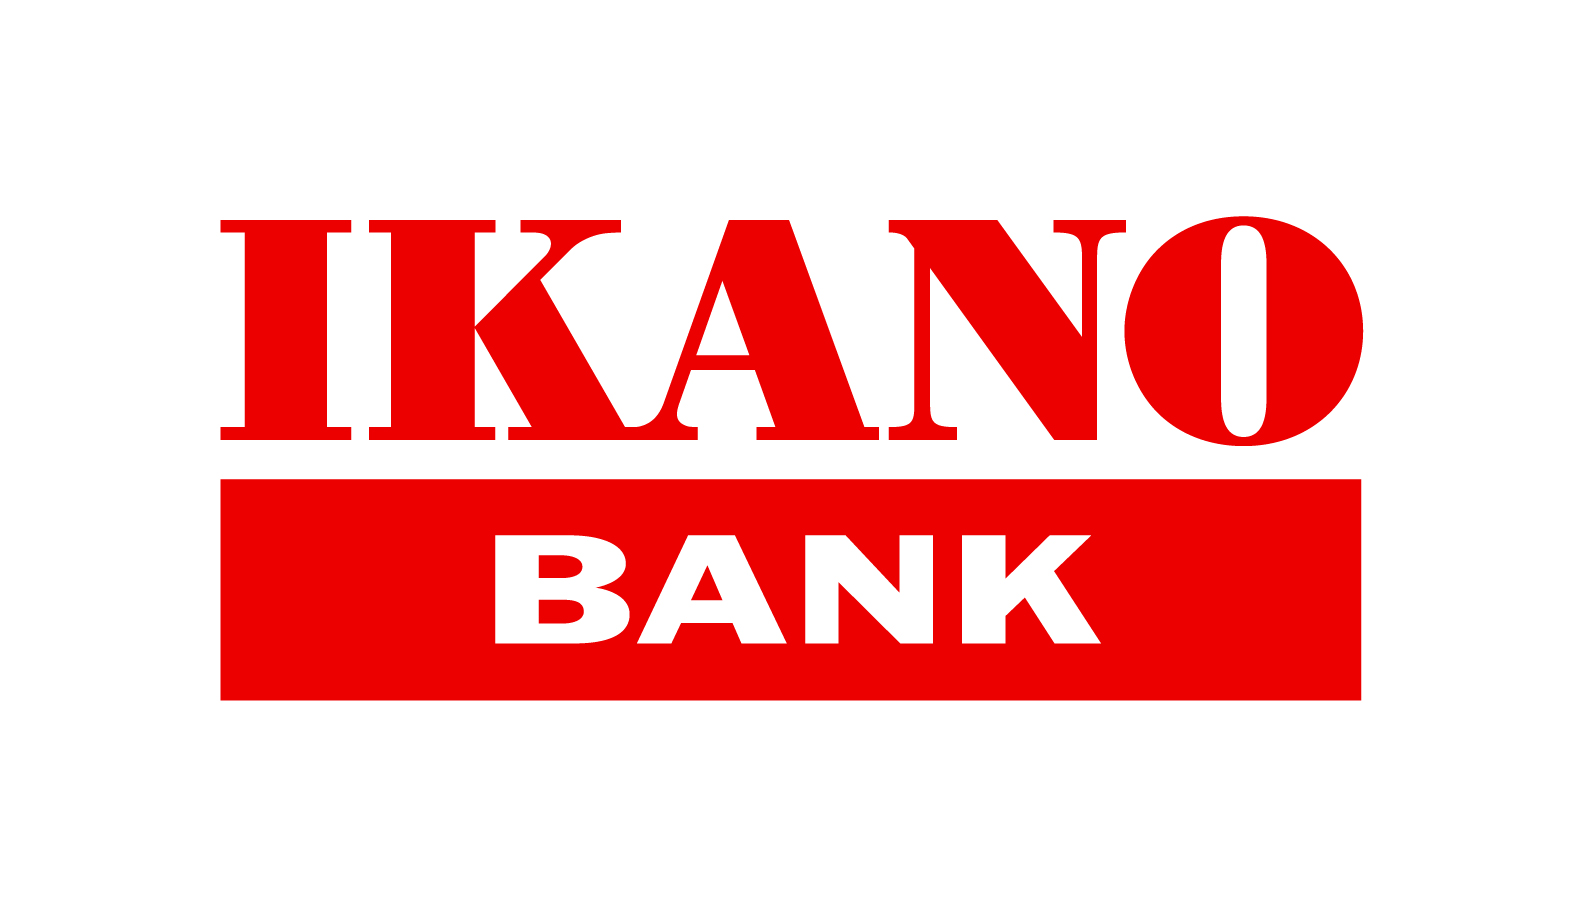 Join Ikano Bank as their new Head of Legal!